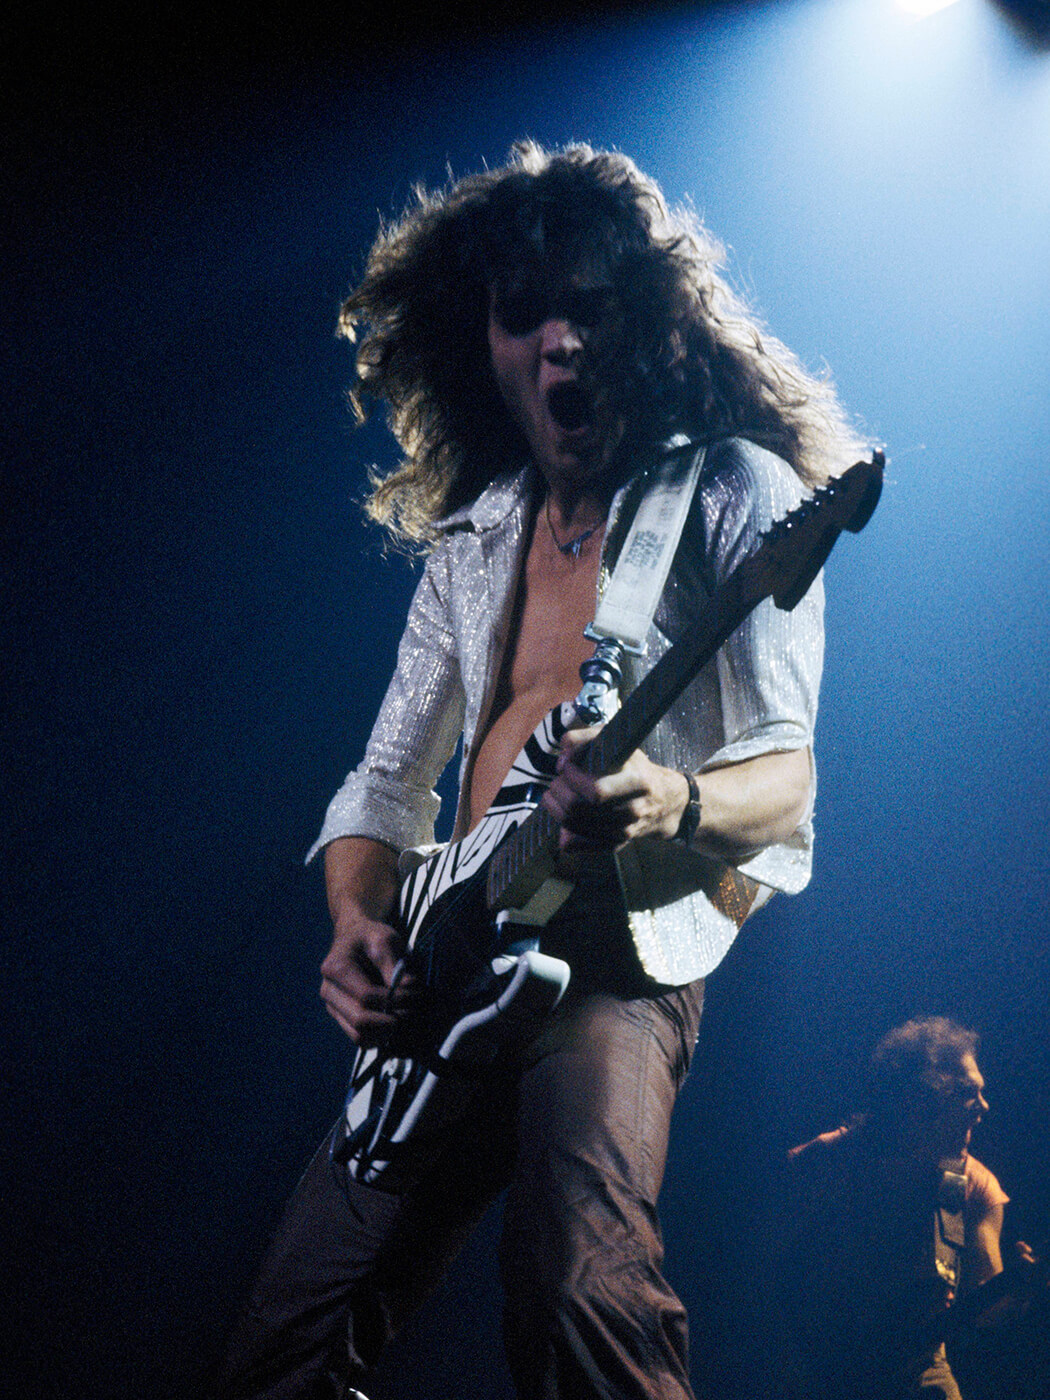 Eddie Van Halen performing onstage with his Frankenstein guitar in 1978. It sports black and white stripes. Photo by Fin Costello/Redferns via Getty Images